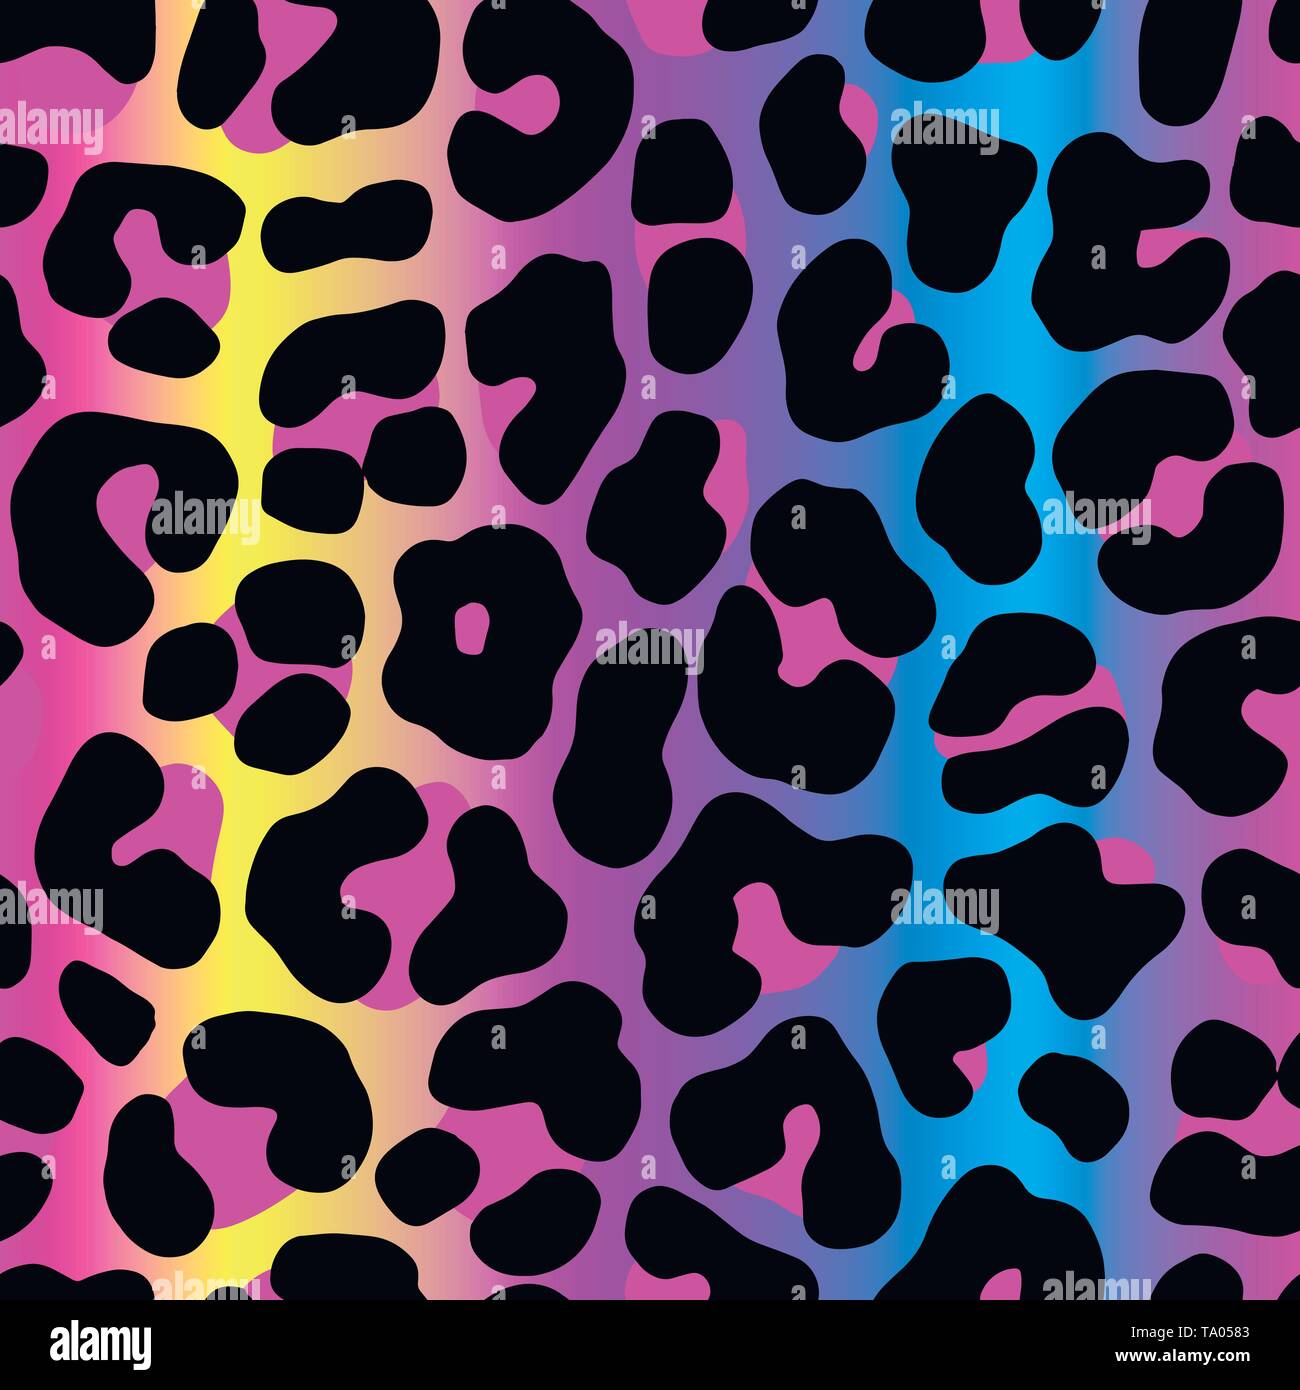 https://c8.alamy.com/comp/TA0583/vector-neon-gradient-animal-print-seamless-leopard-pattern-design-for-fabric-and-textile-packaging-web-and-social-media-design-TA0583.jpg